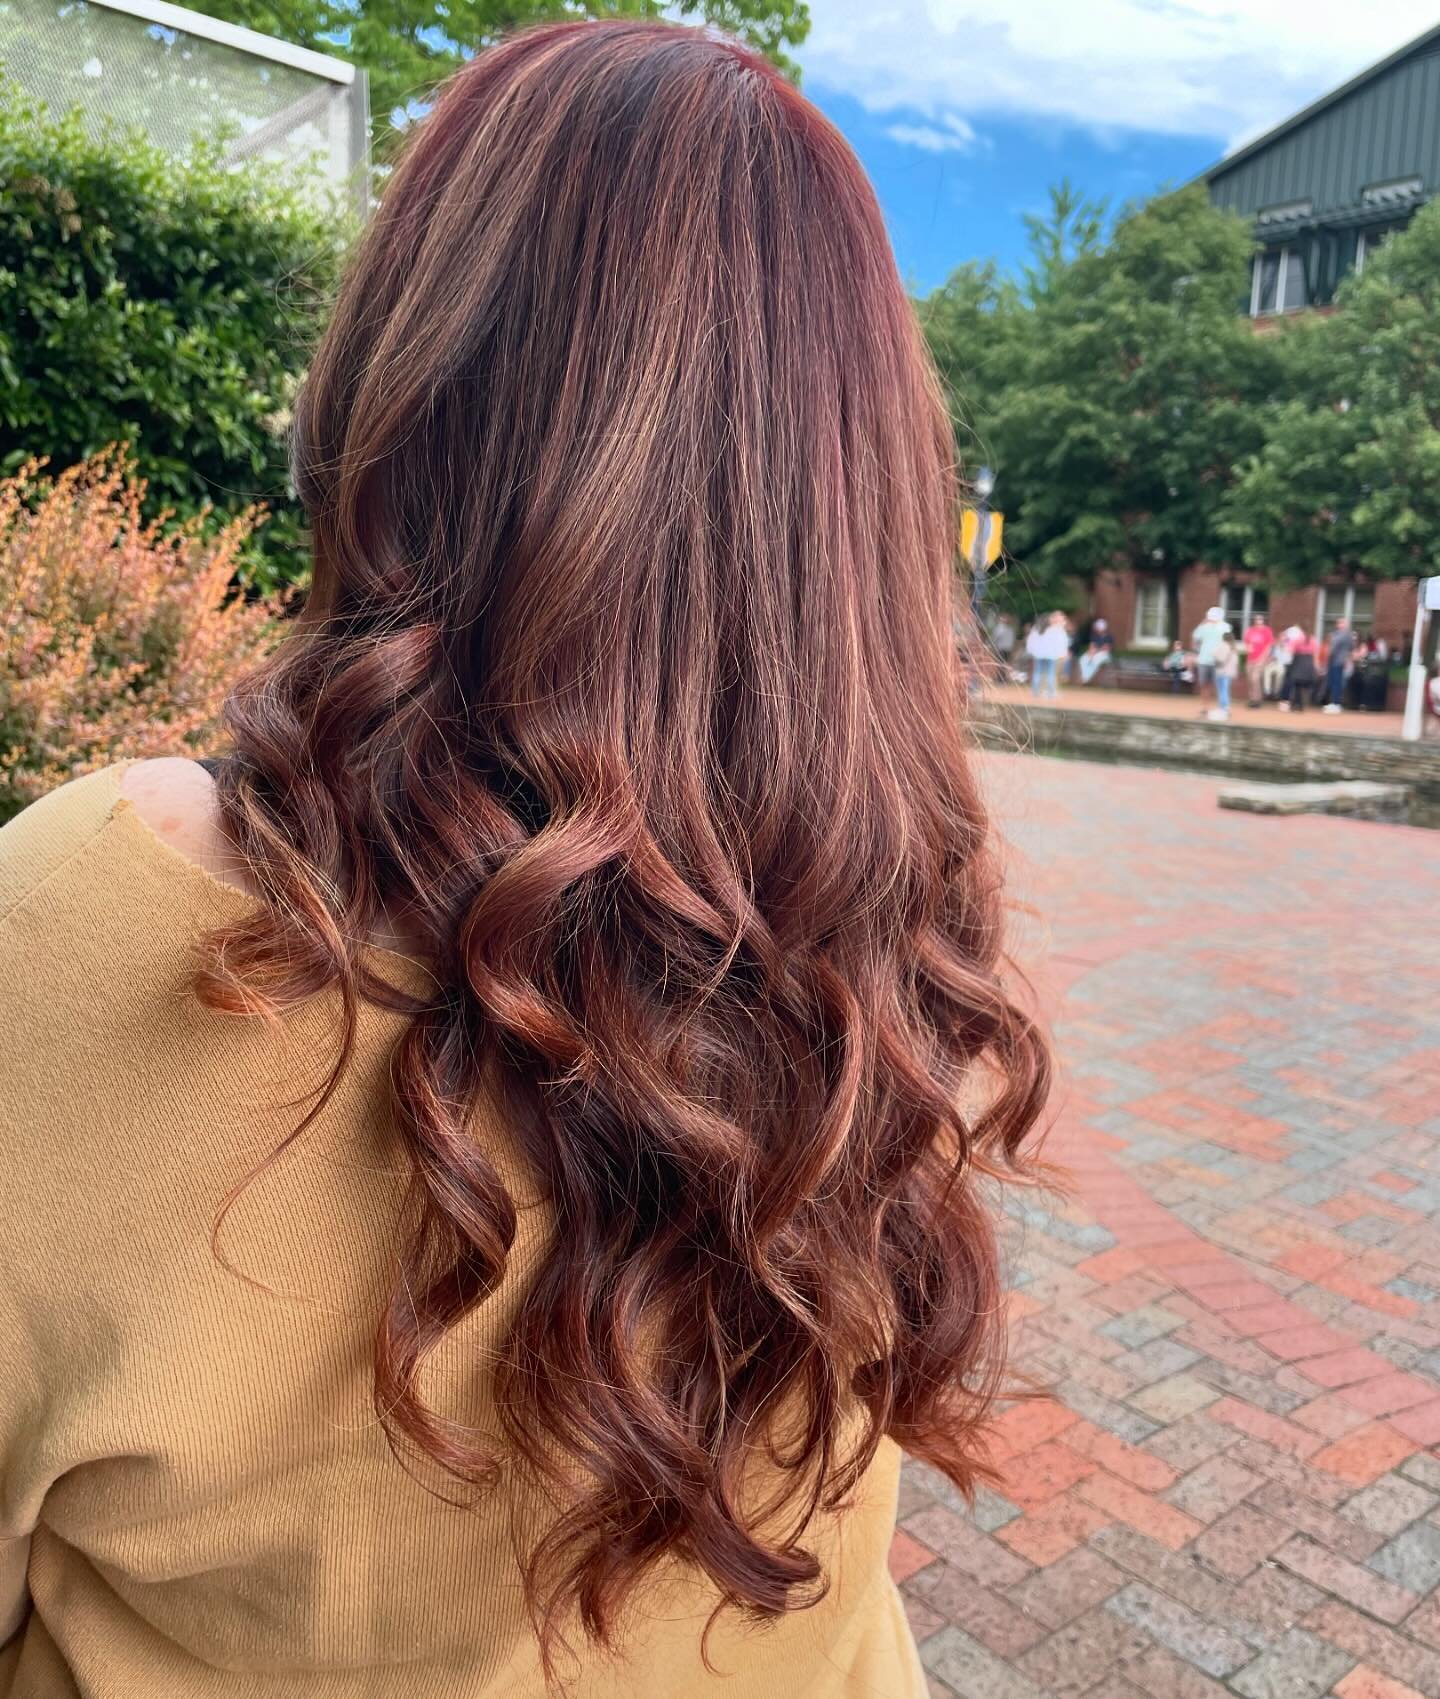 &hearts;️Refreshing the red with some highlights and a little color. Swipe to see the before!&hearts;️
Styled by: @brianabalodis.hair 
.
.
.
.
.
#redhair #redcoloredhair #redhair #dimensionalhair #dimensionalred #hairchange #haircolor #hairsalon #cur